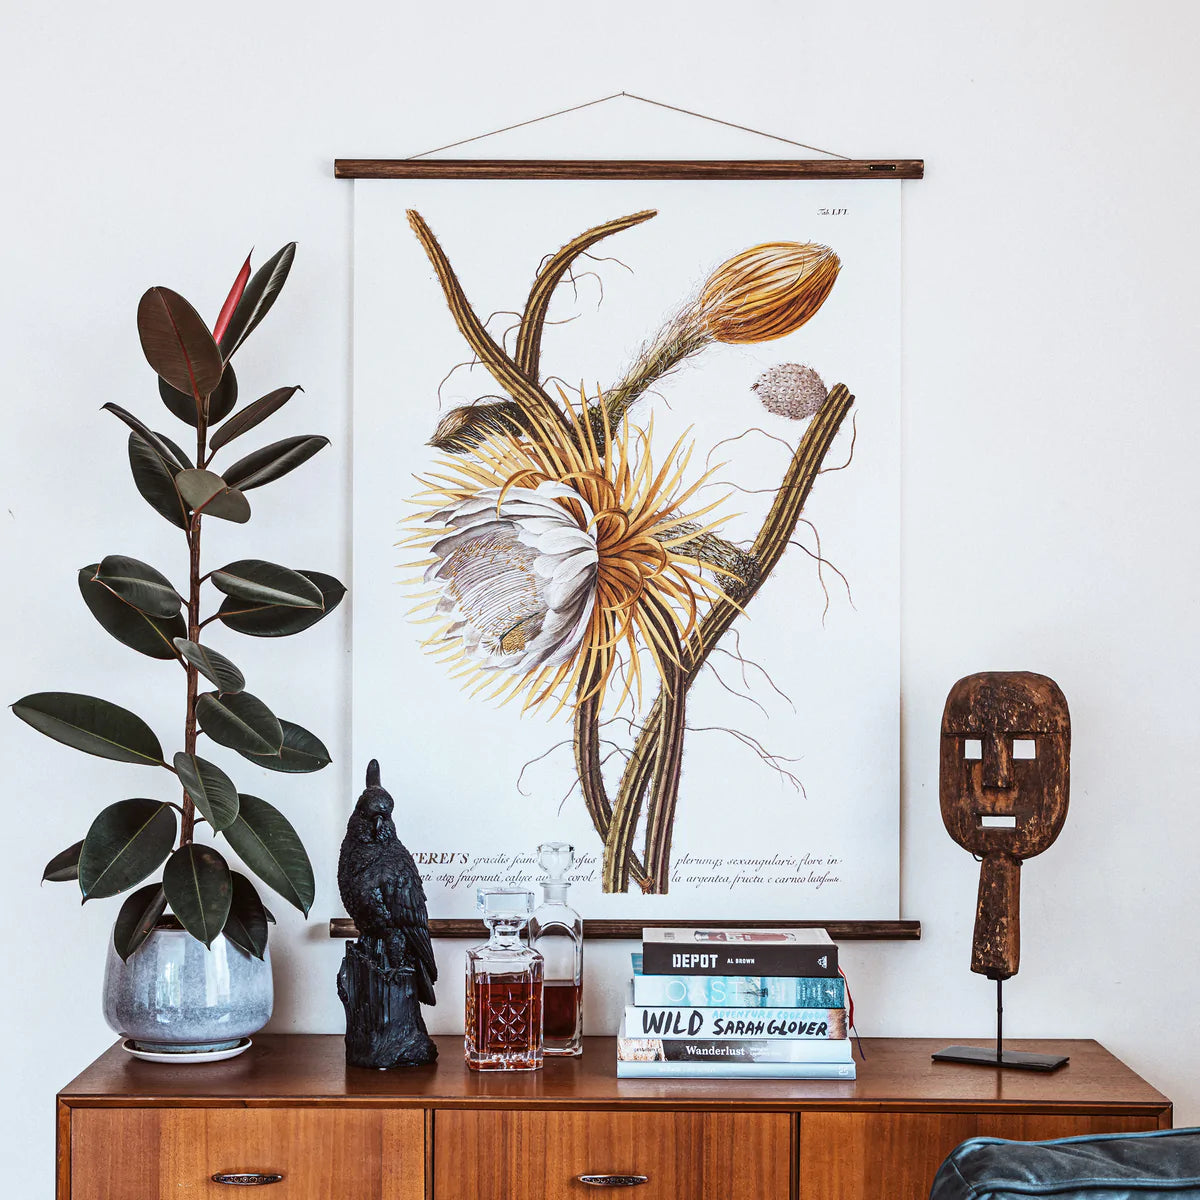 Trew Cereus Wall Chart hanging in a living environment